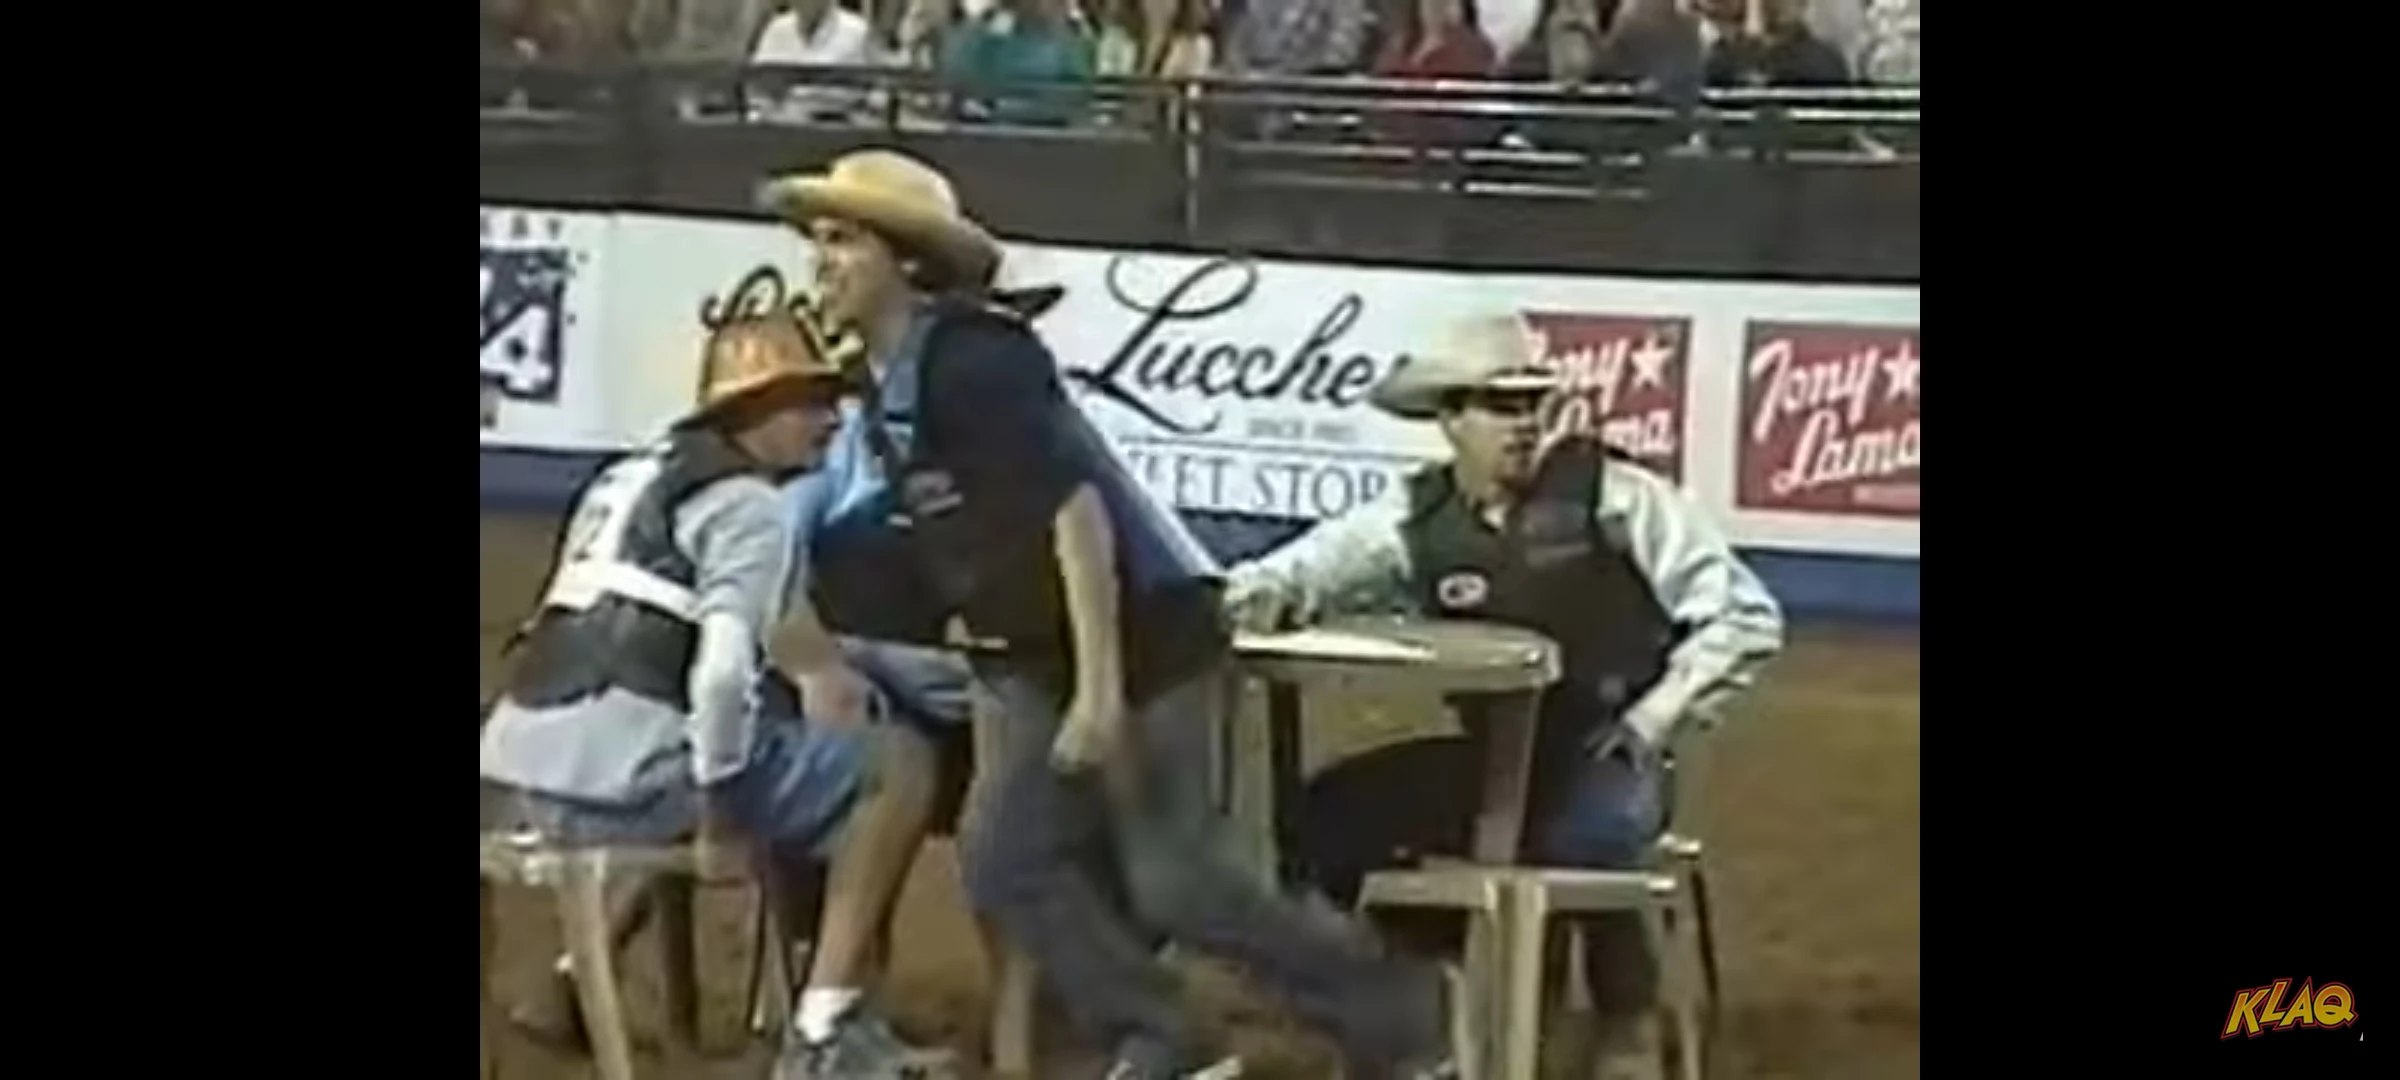 3 Behind-the-Scenes Facts About the Fernie Rodeo Poker Video